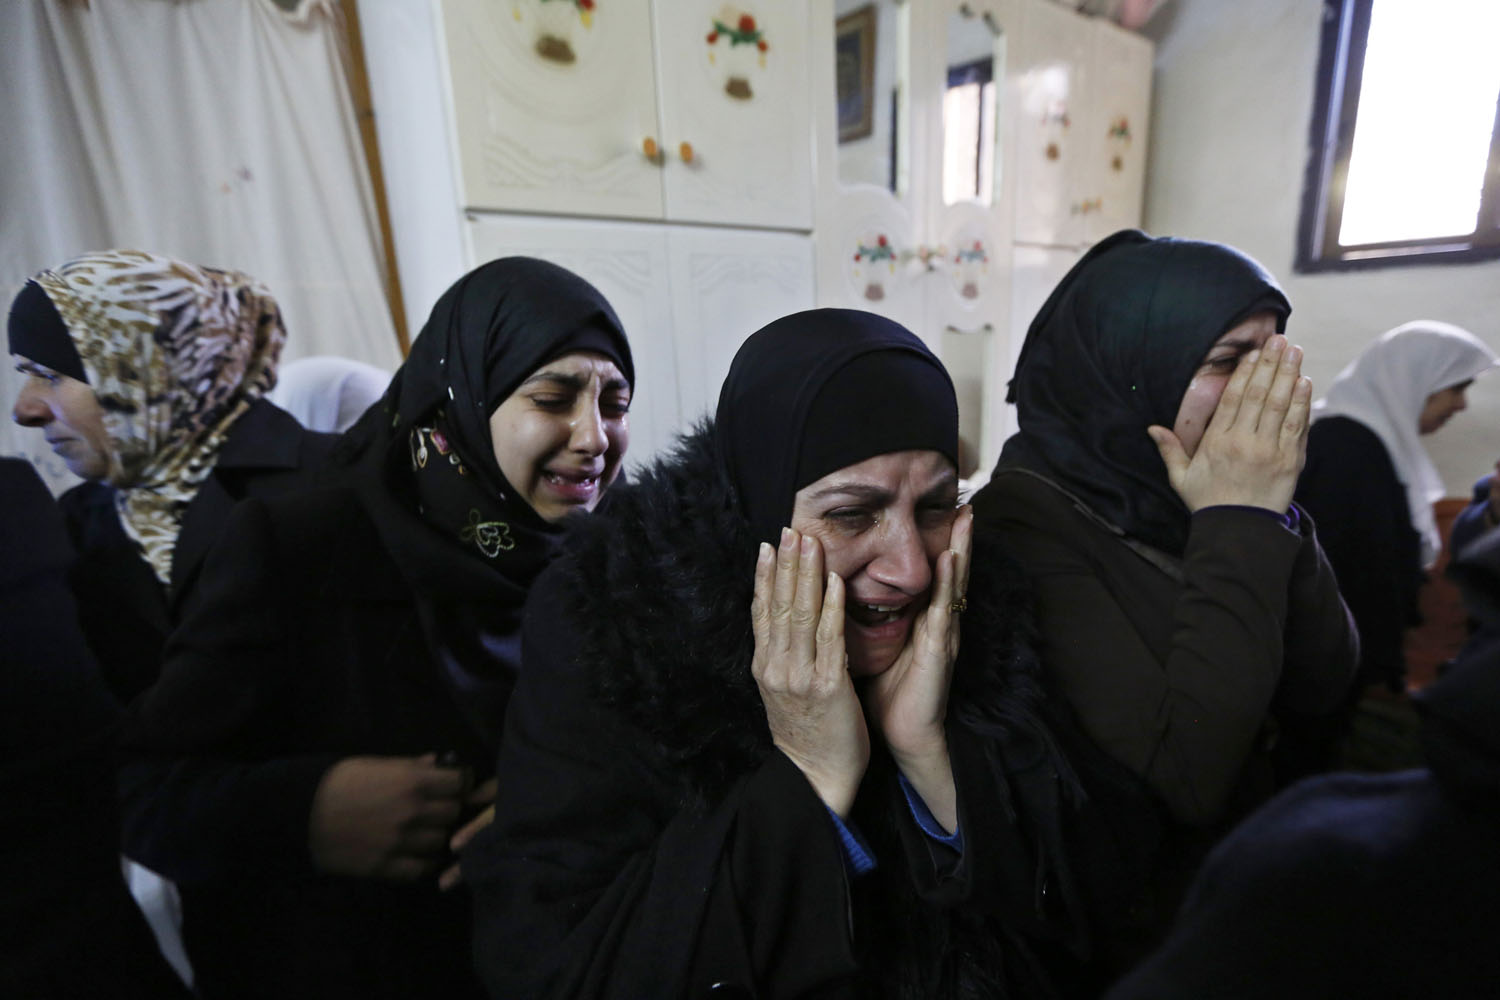 Jan. 2, 2014. Relatives mourn before the funeral of Palestinian Saeed Jaser Ali, 85, in the West Bank village of Kufr Kadum near Nablus. Ali died after inhaling tear gas fired by the Israeli army to disperse protesters in the occupied West Bank, witnesses said.